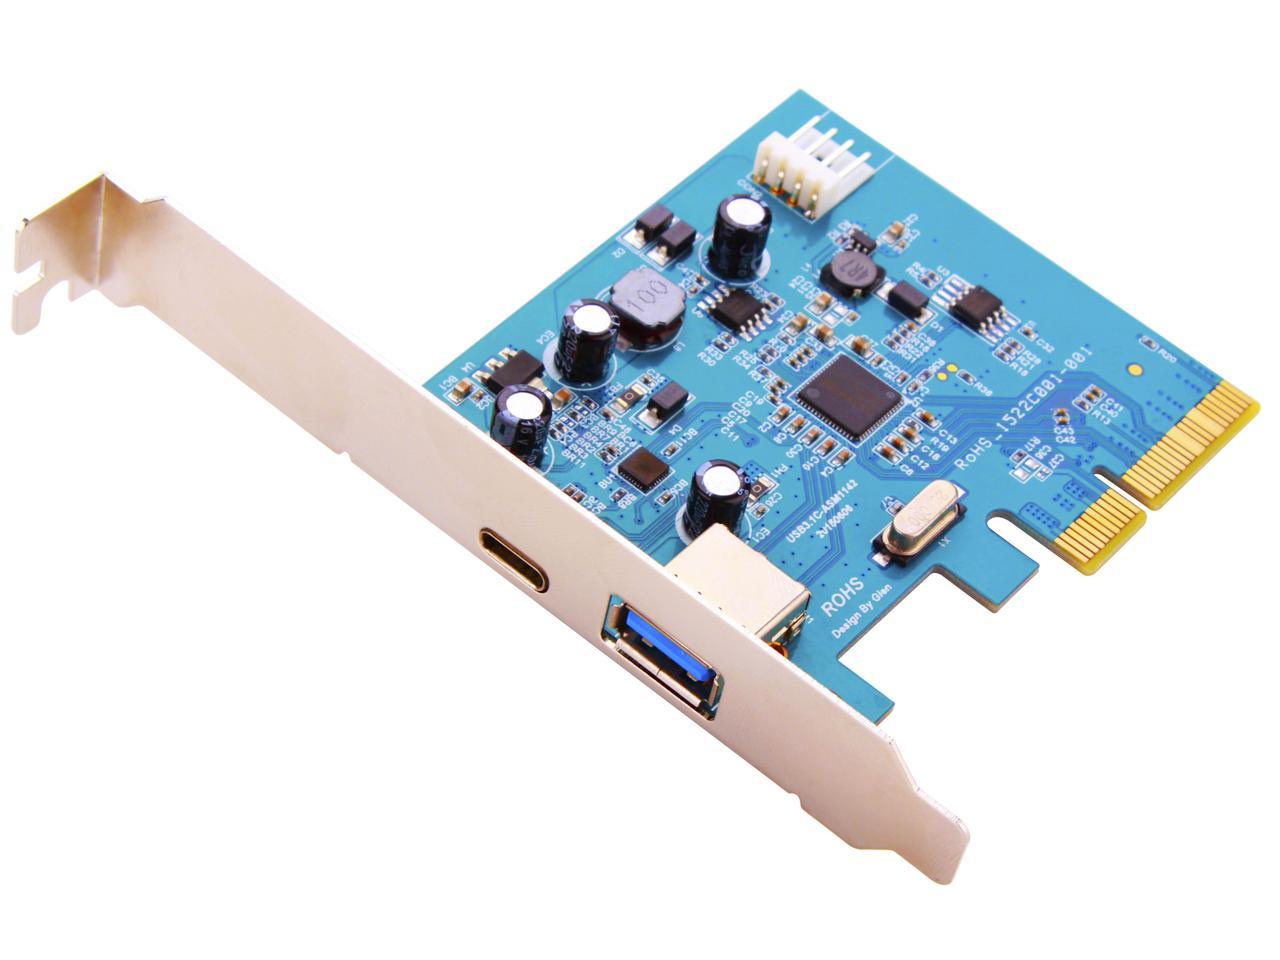 ZTC Sky USB 3.1 Add-On PCIe Card High Speed Dual C and A USB ports Model ZTC-PCIE001-C3